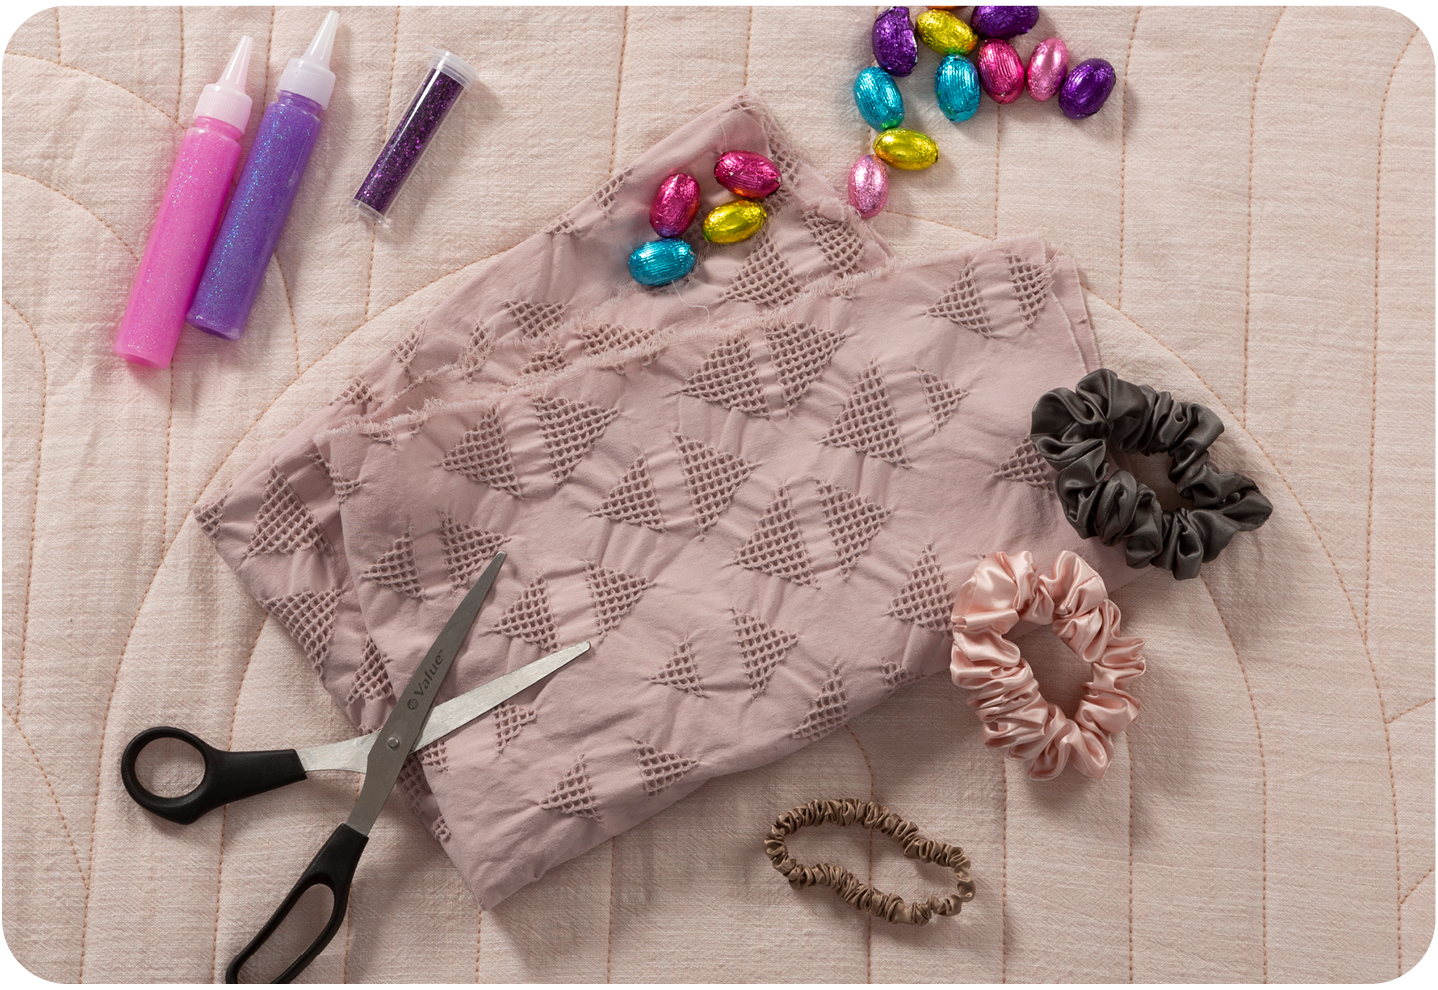 Overhead shot of the various things you can use to make your DIY rabbit, including fabric, scissors, scrunchies, and glitter glue.